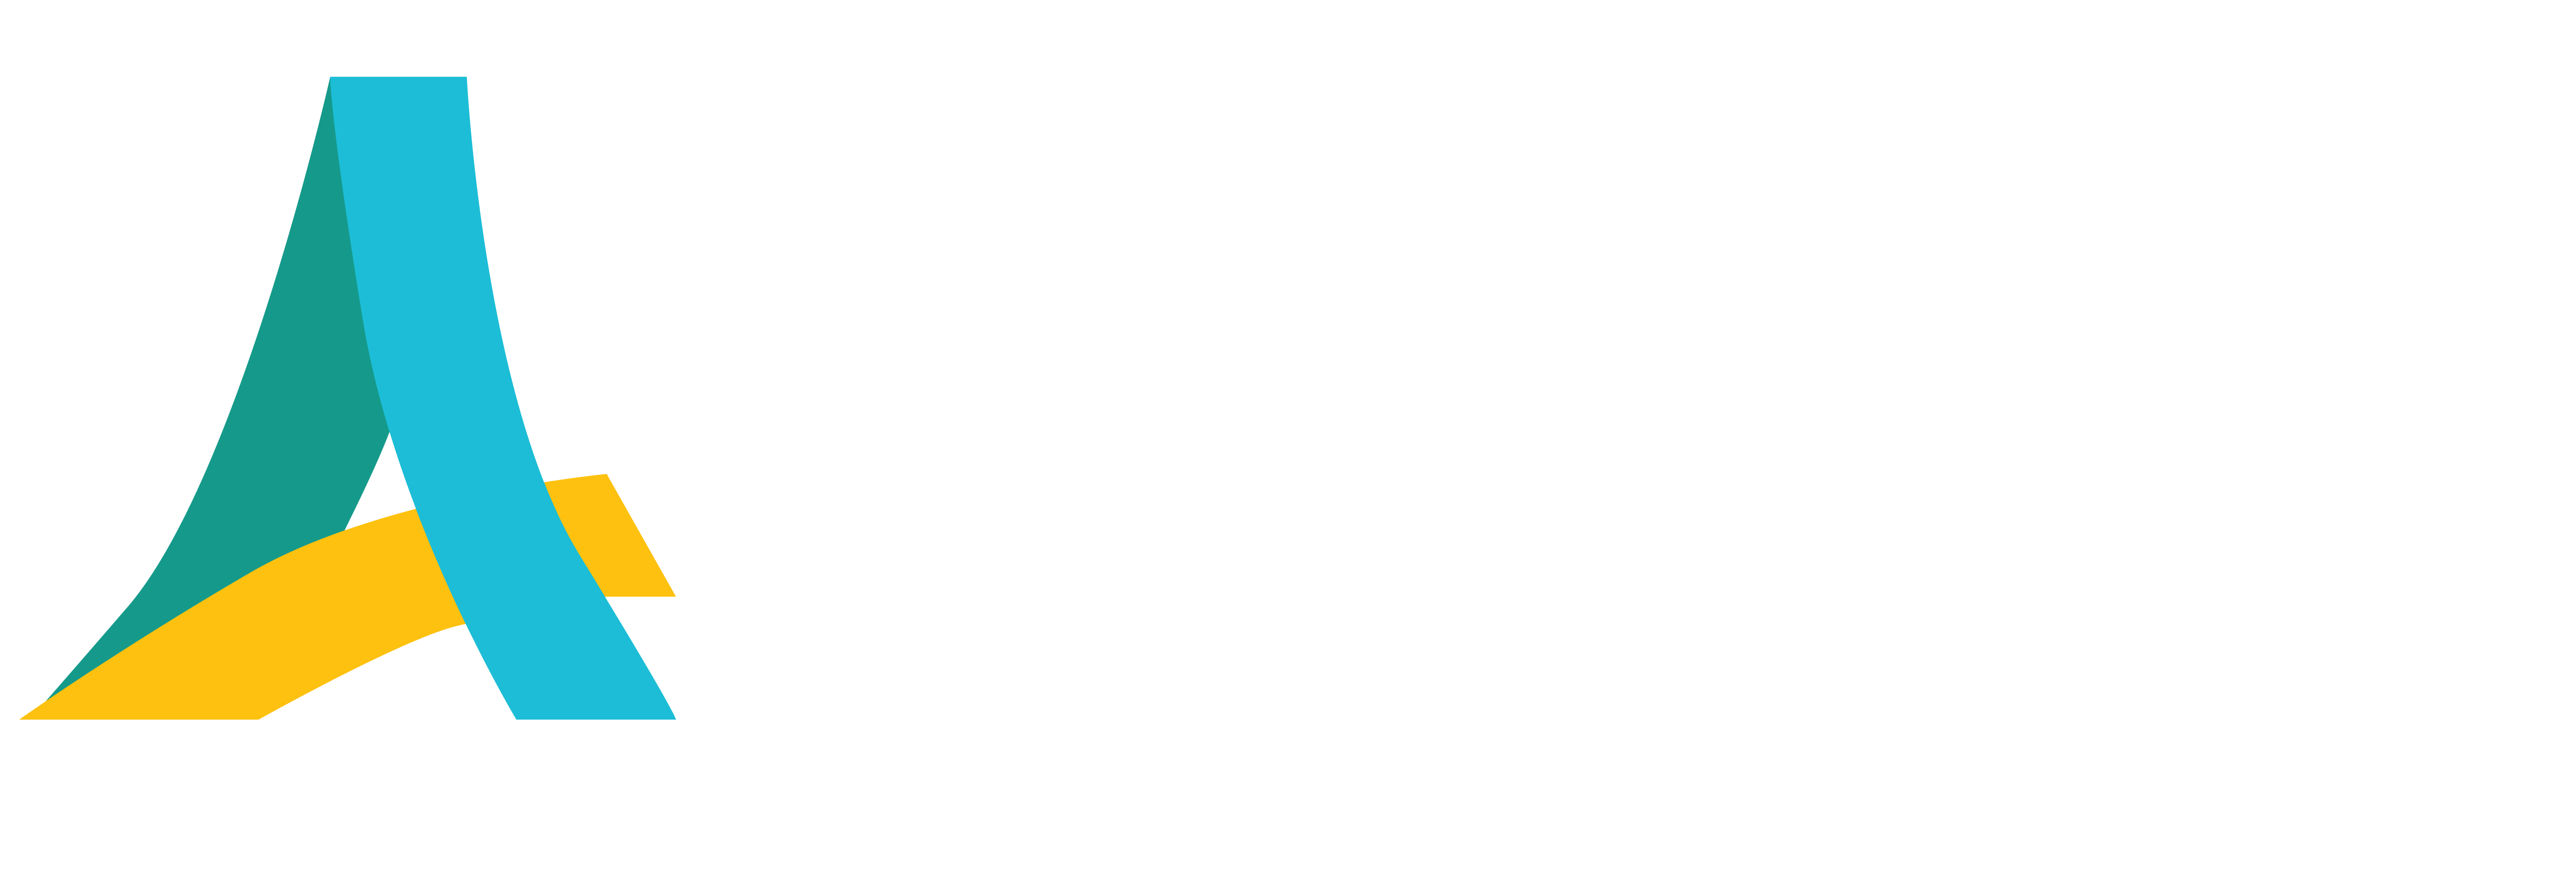 African Institute of Tourism and Field Guiding